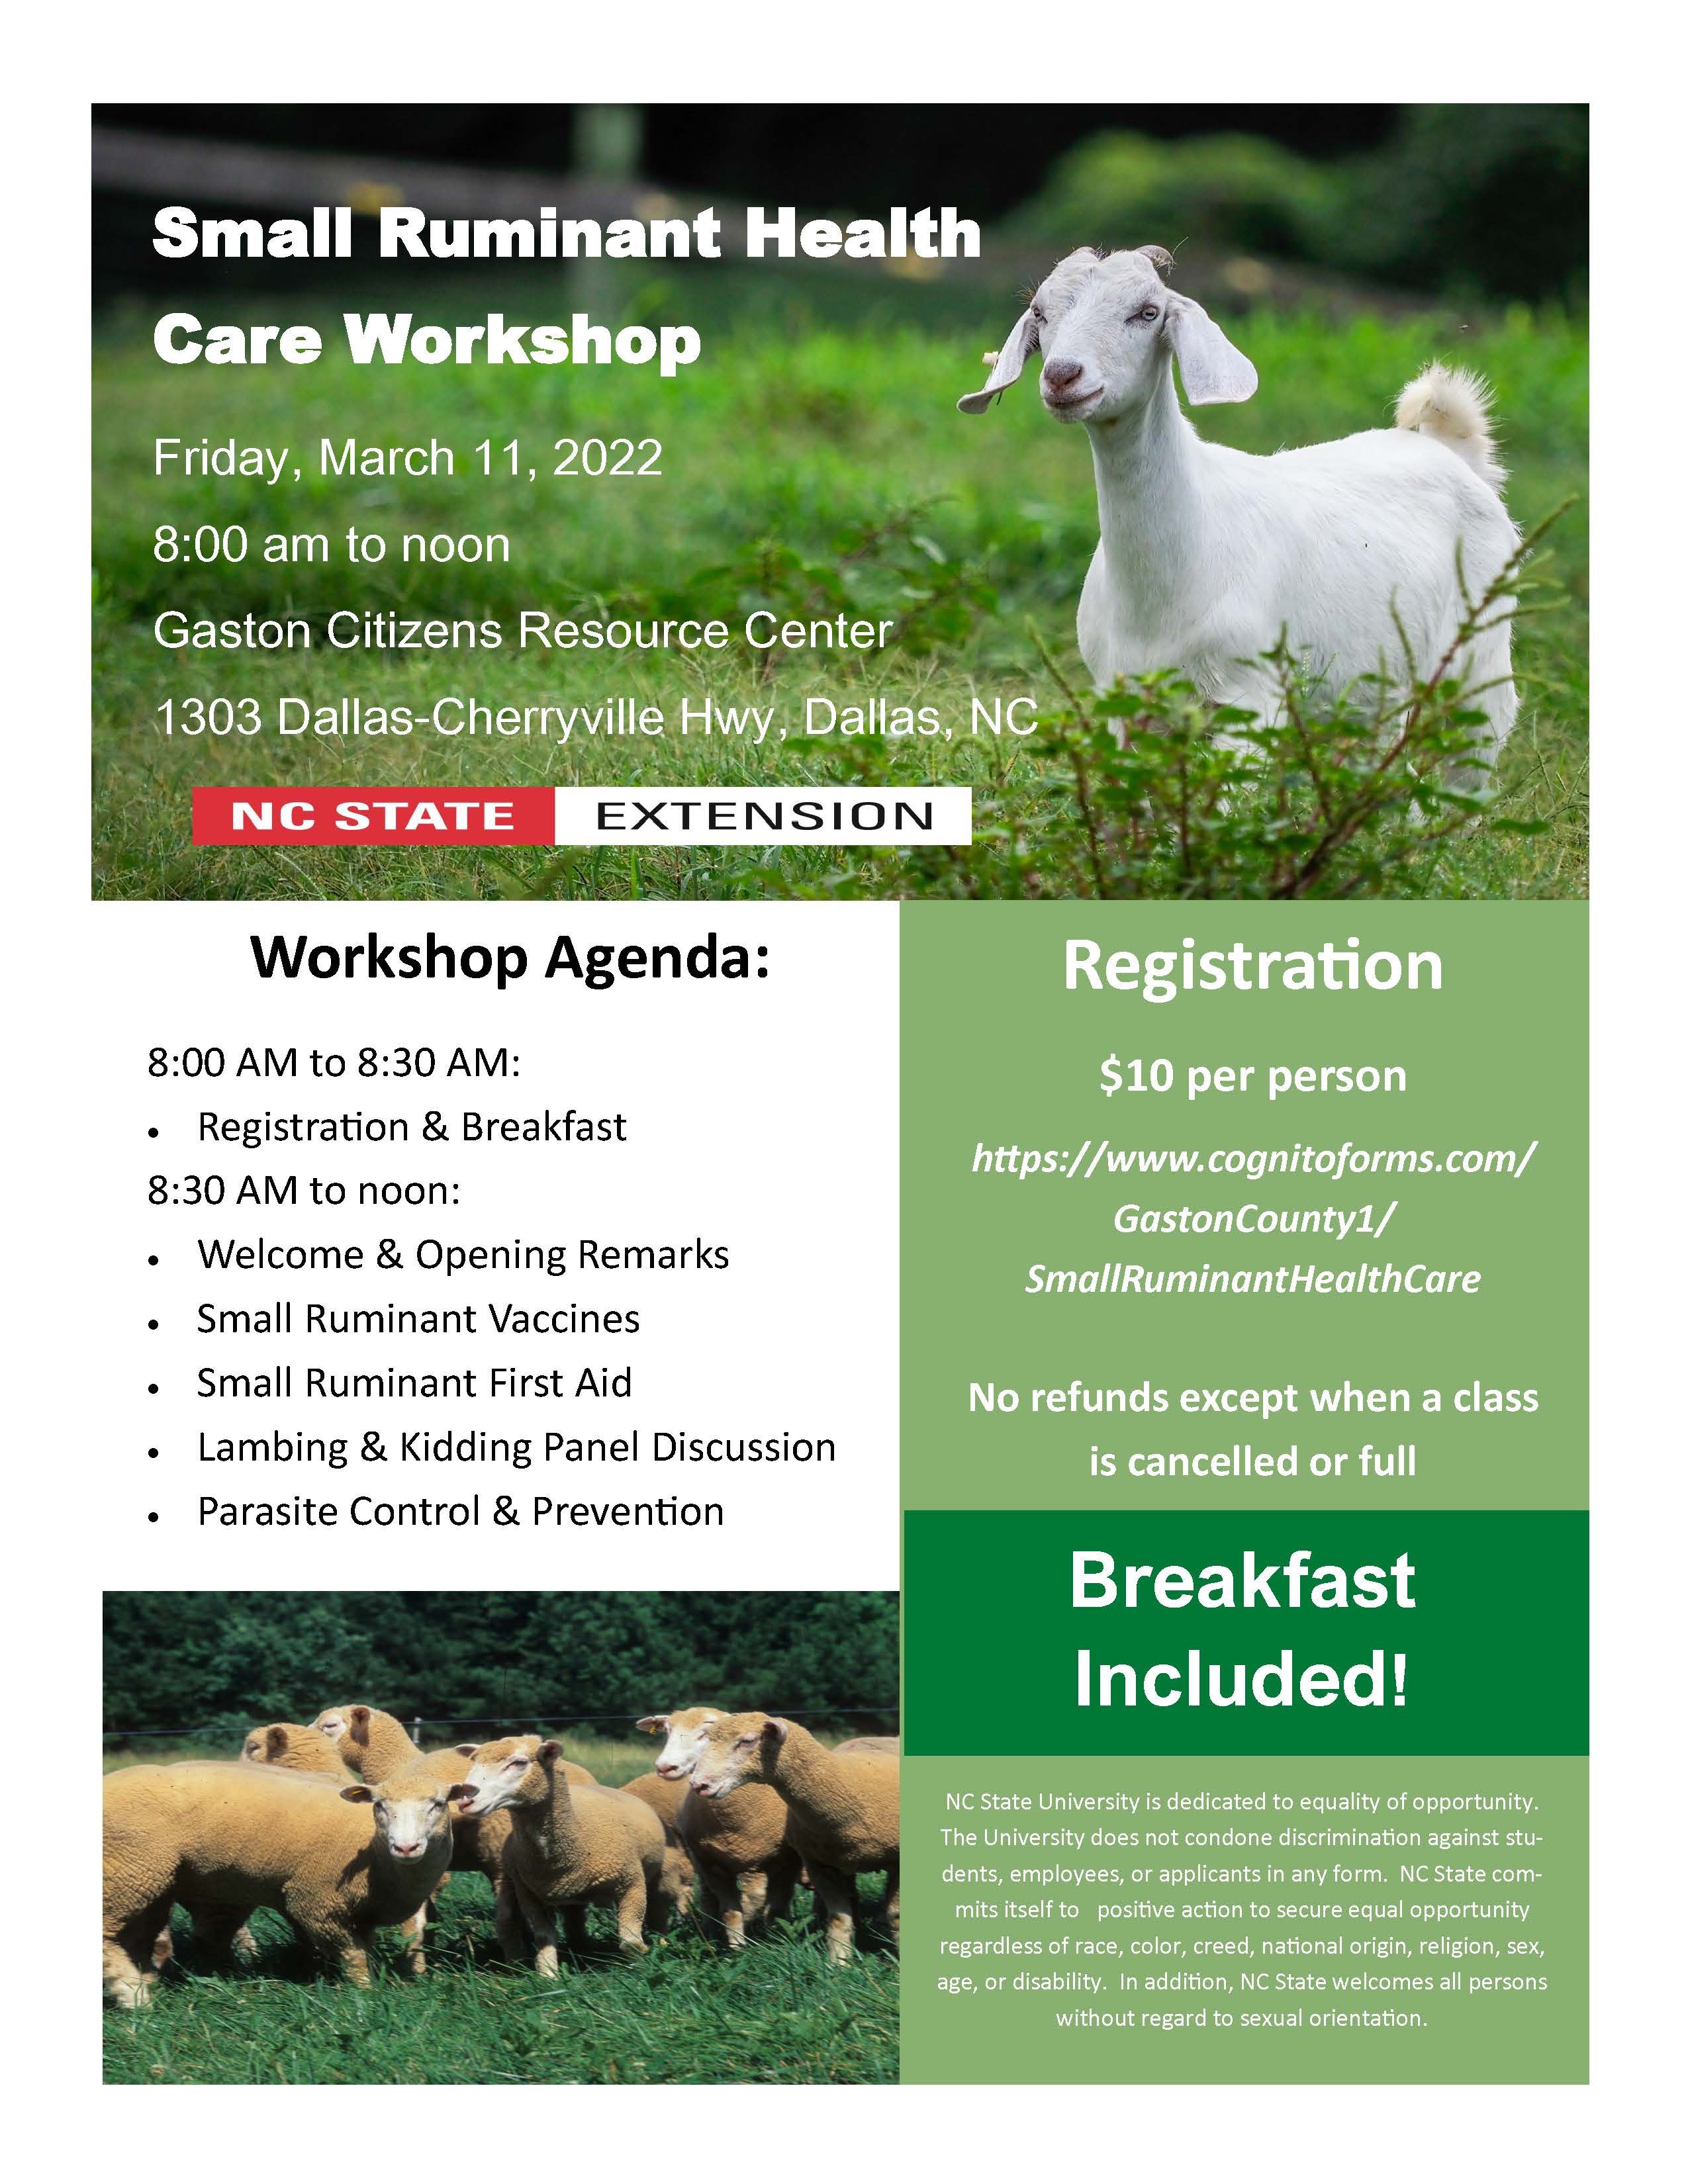 Small Ruminant Health Care Workshop | NC State Extension